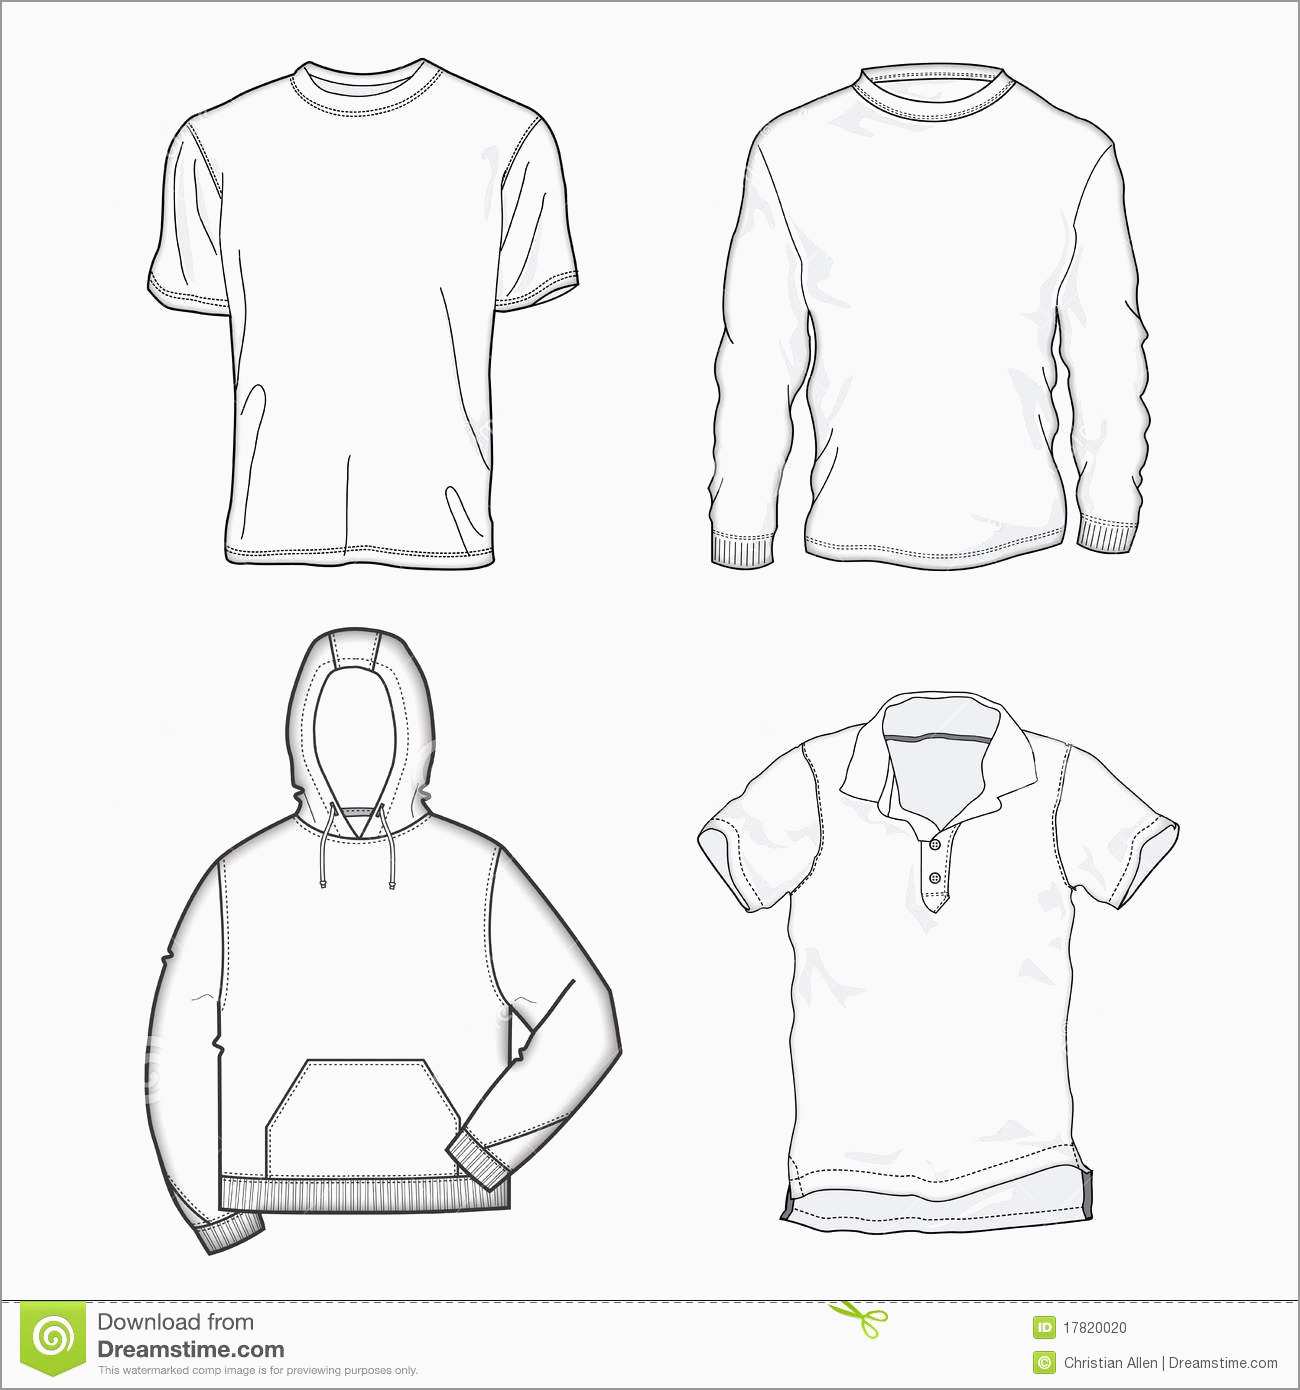 free photoshop clothing apparel templates vector